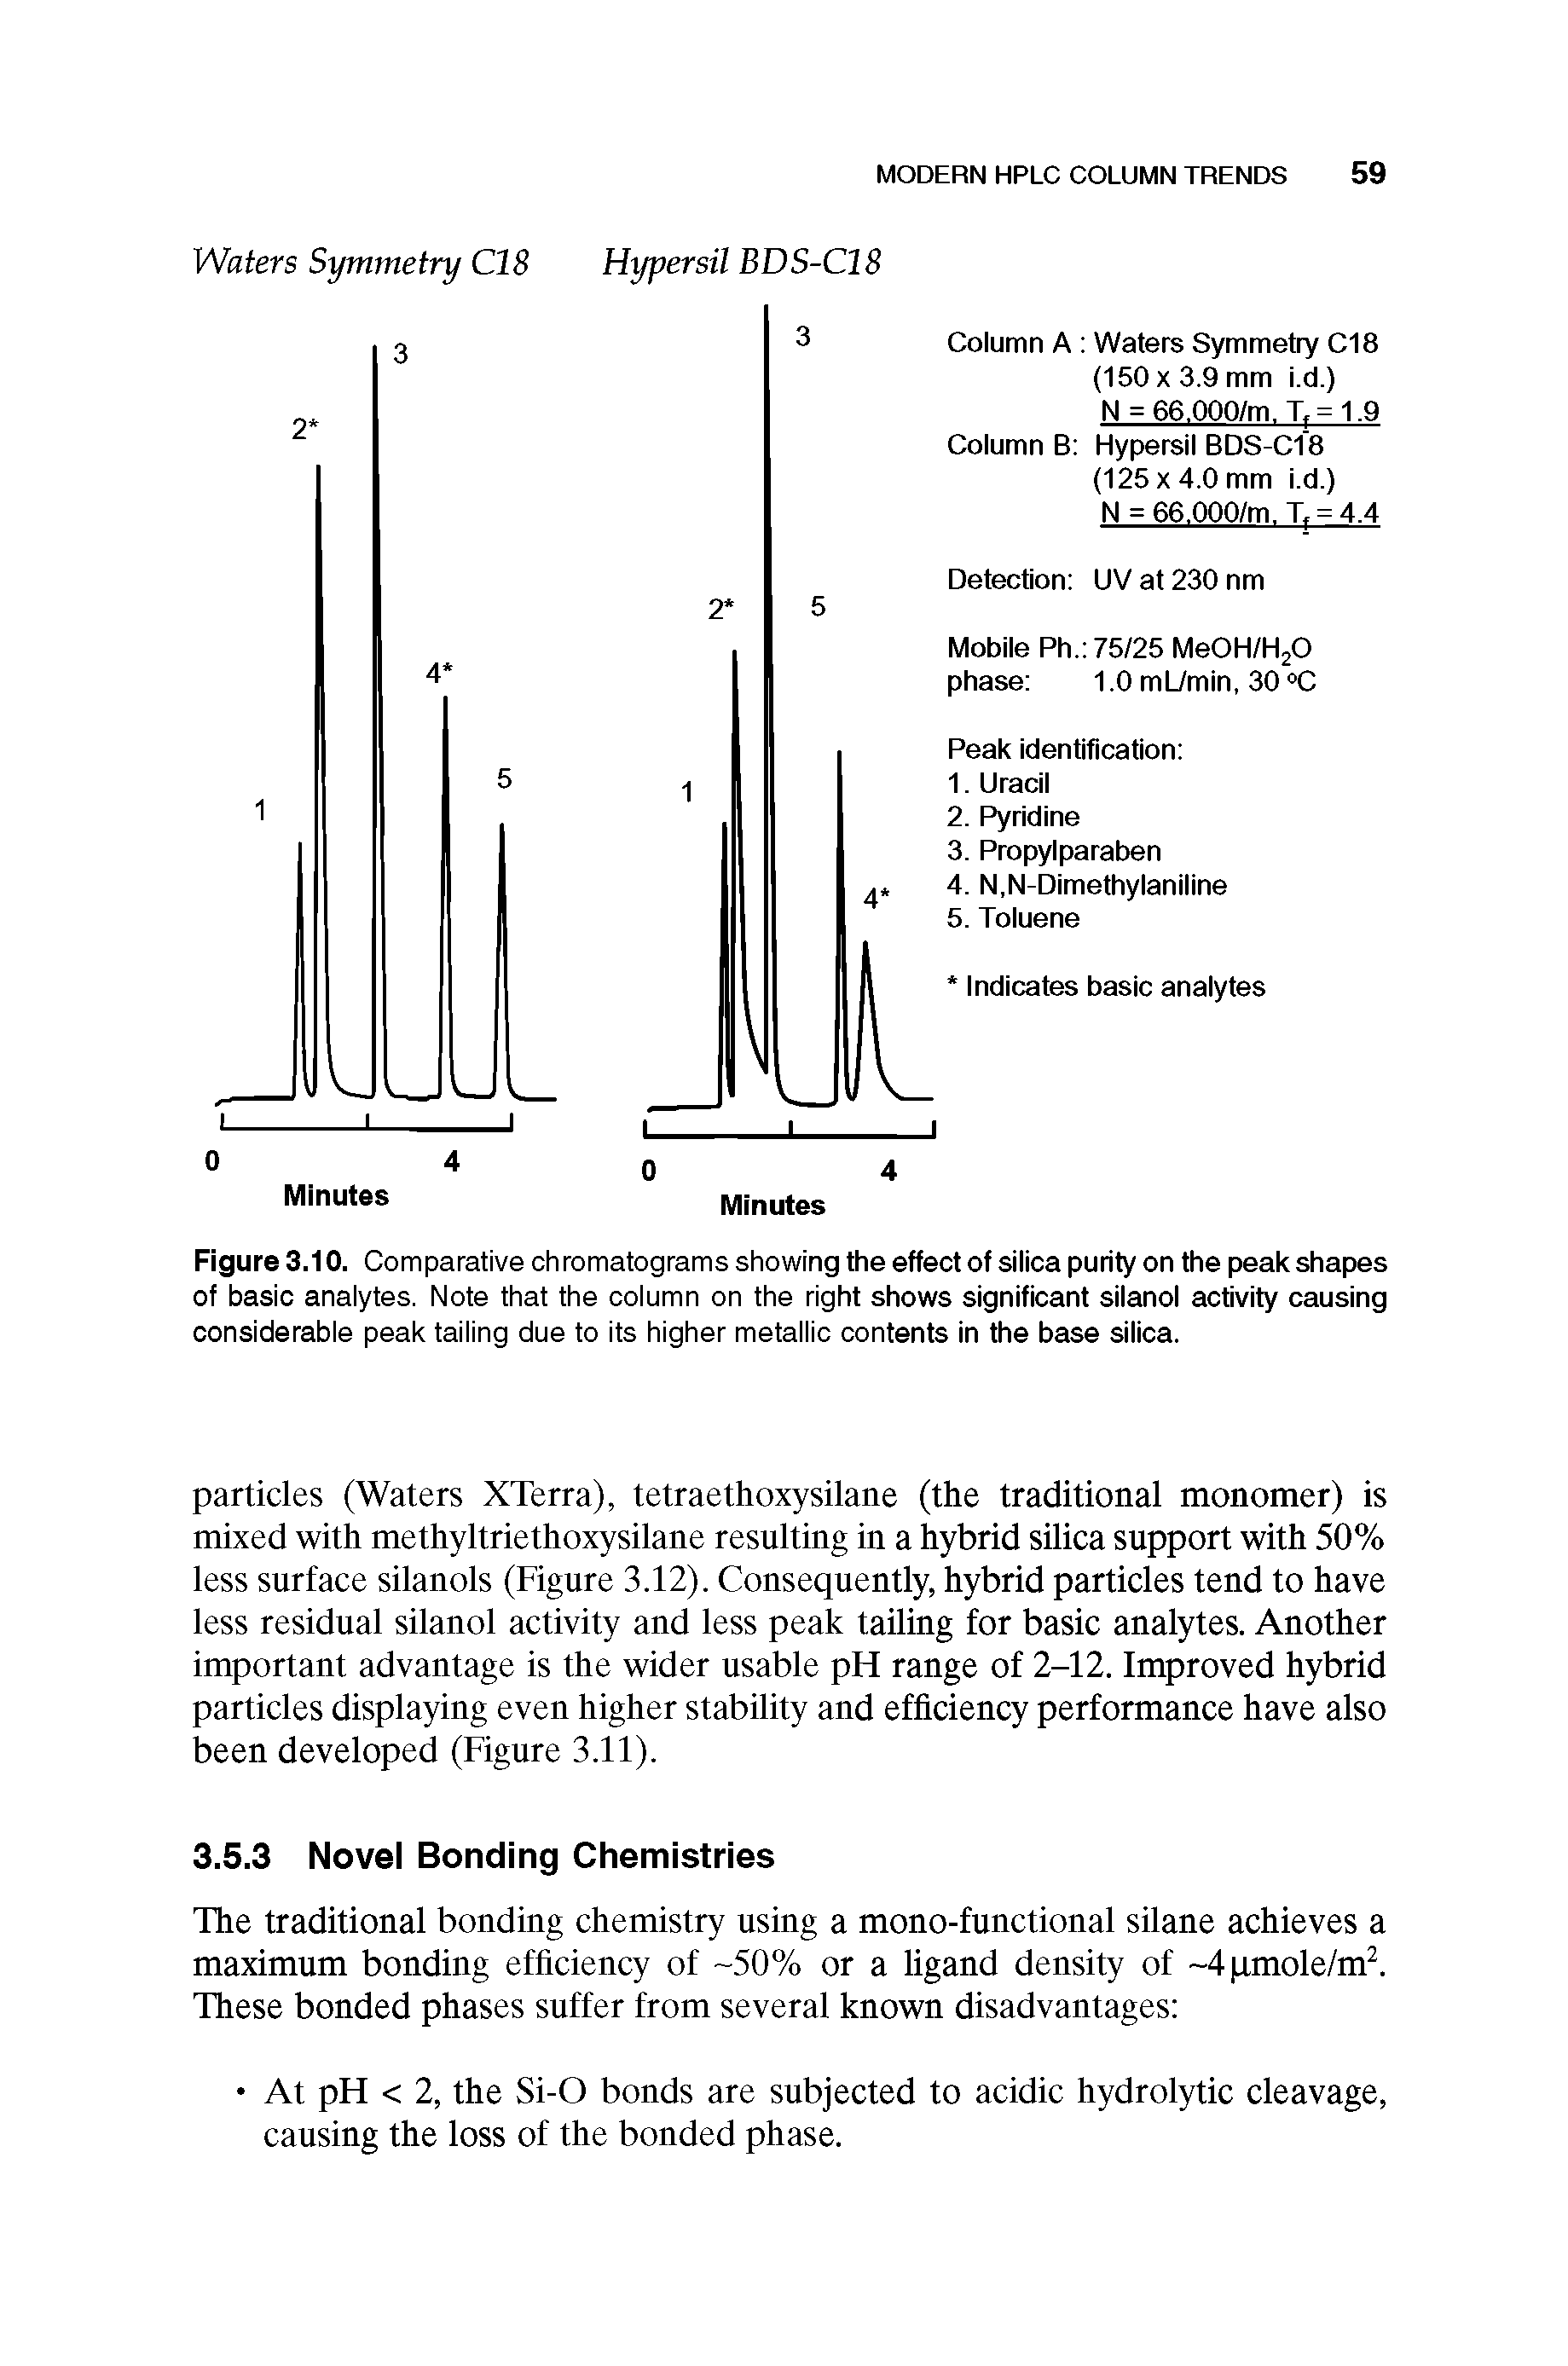 Figure 3.10. Comparative chromatograms showing the effect of silica purity on the peak shapes of basic analytes. Note that the column on the right shows significant silanol activity causing considerable peak tailing due to its higher metallic contents in the base silica.